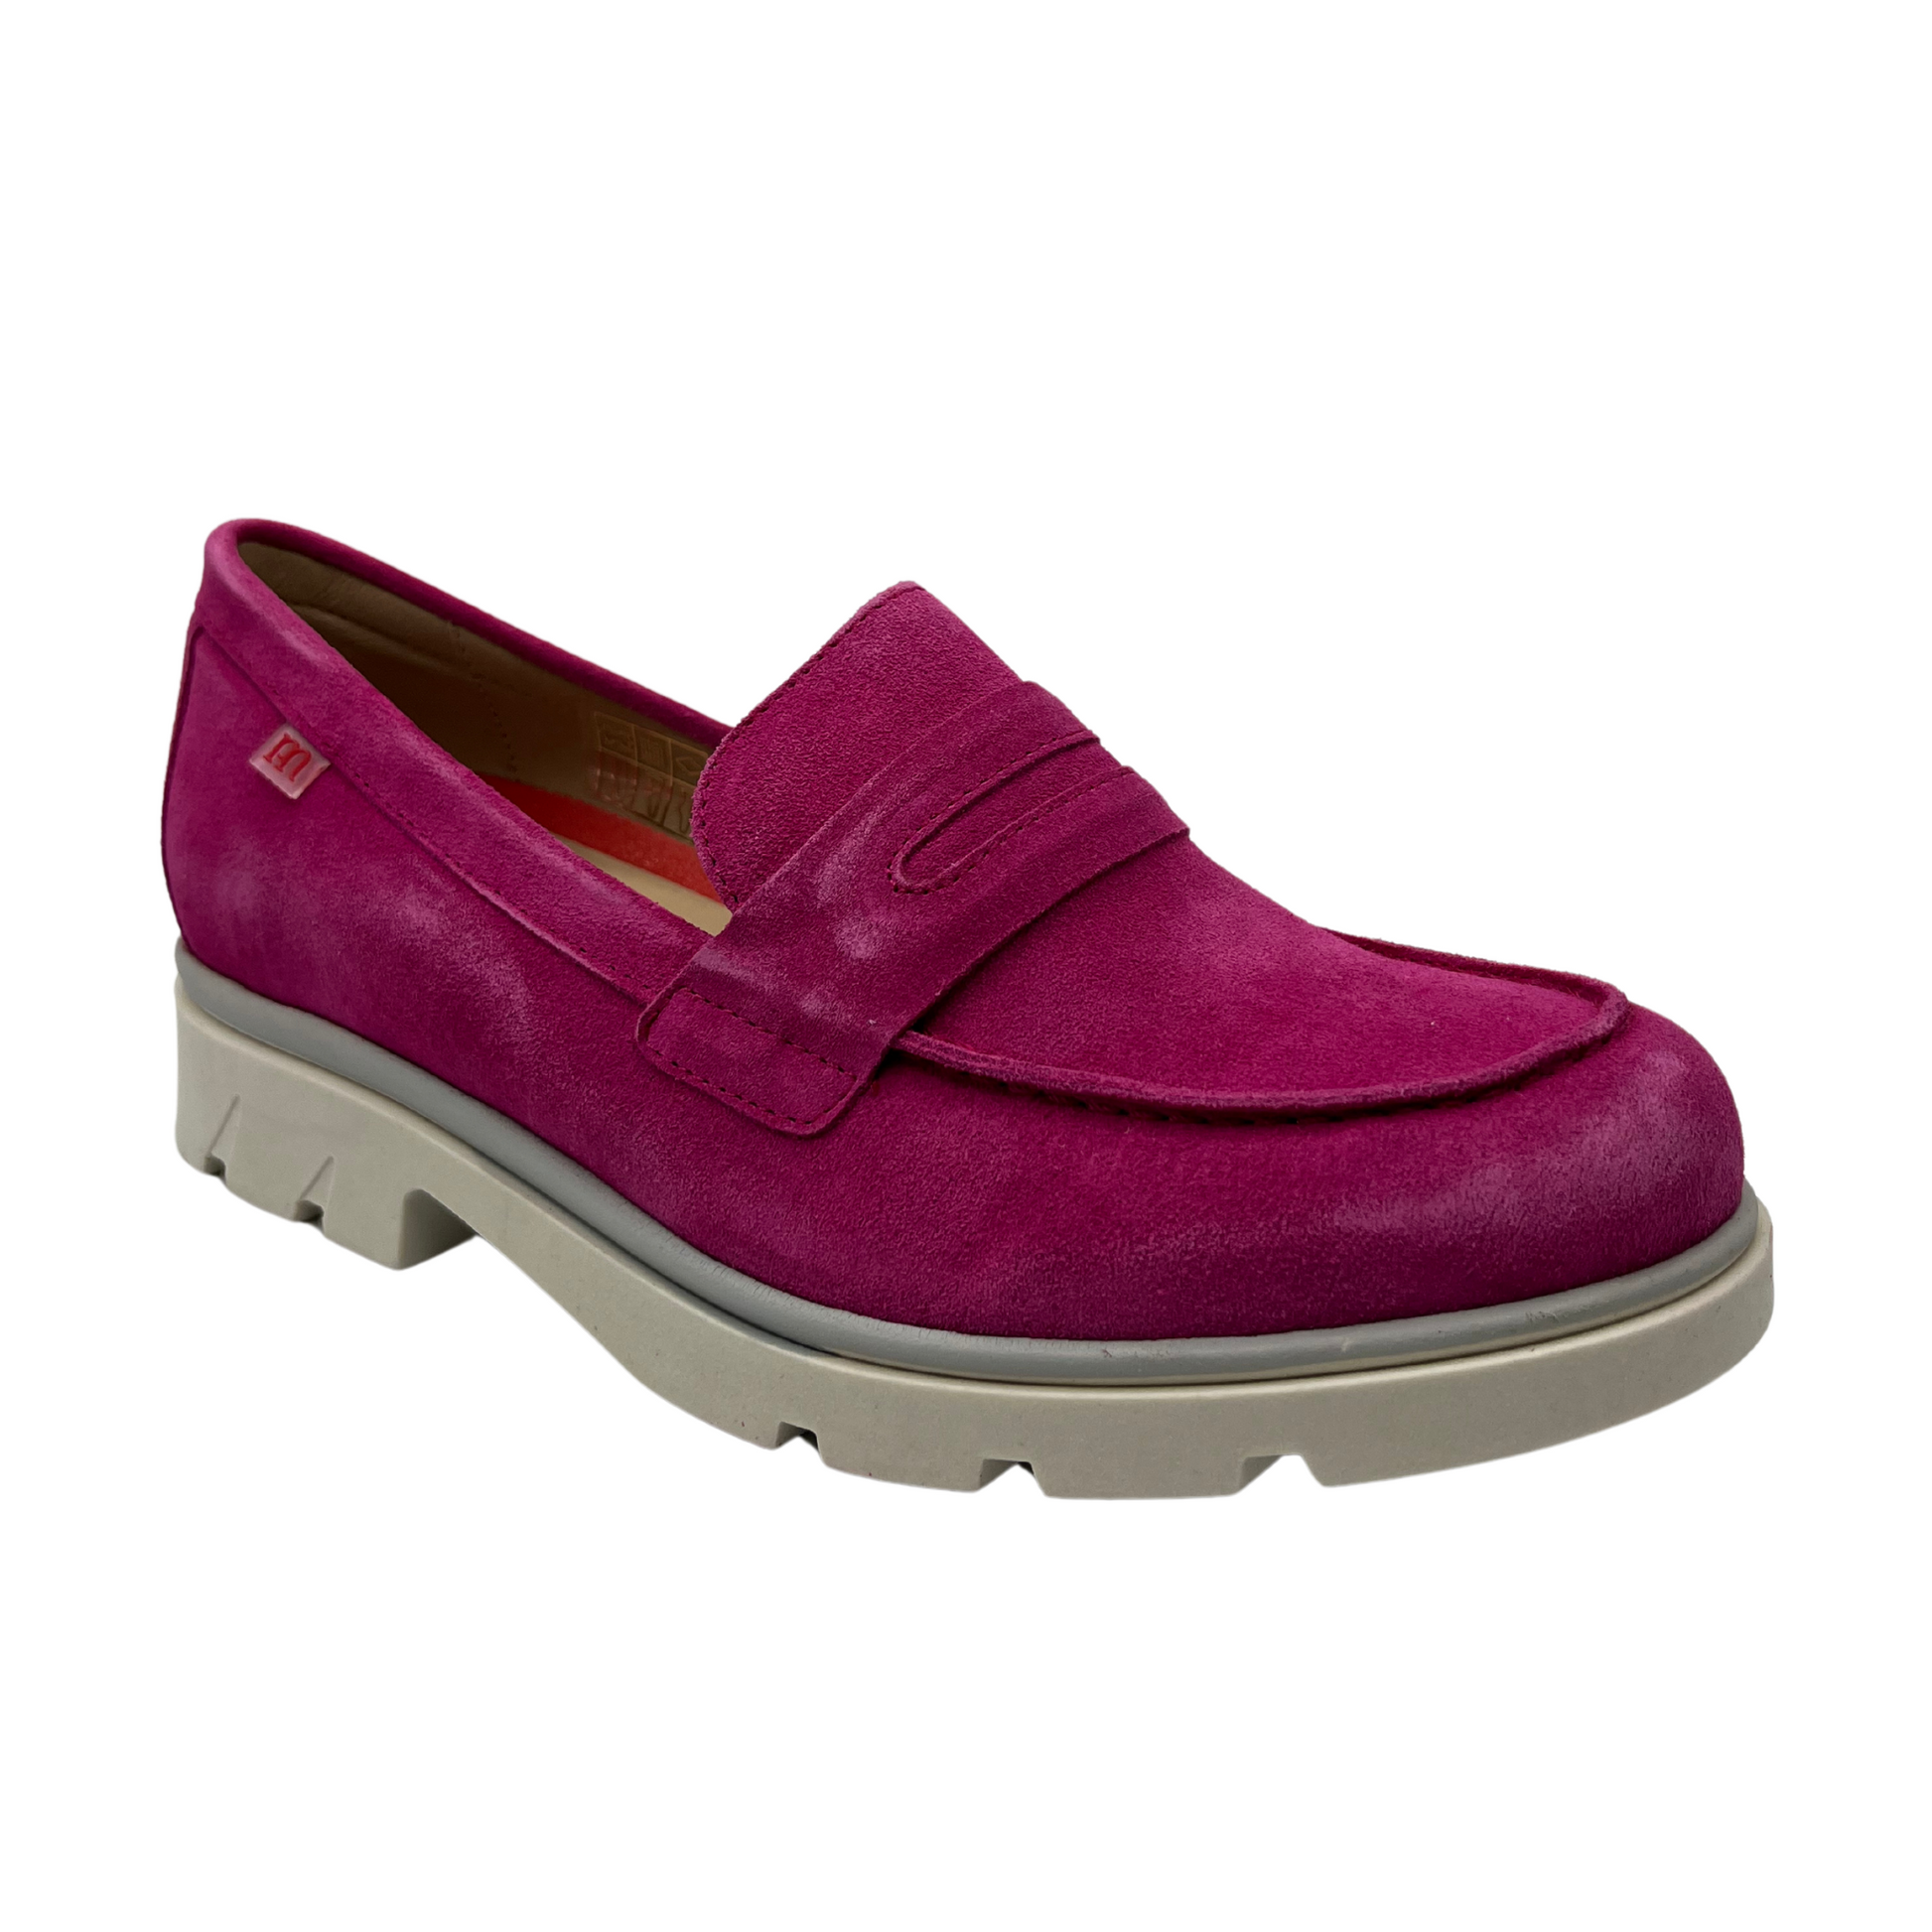 45 degree angled view of fuchsia suede loafer with chunky white sole